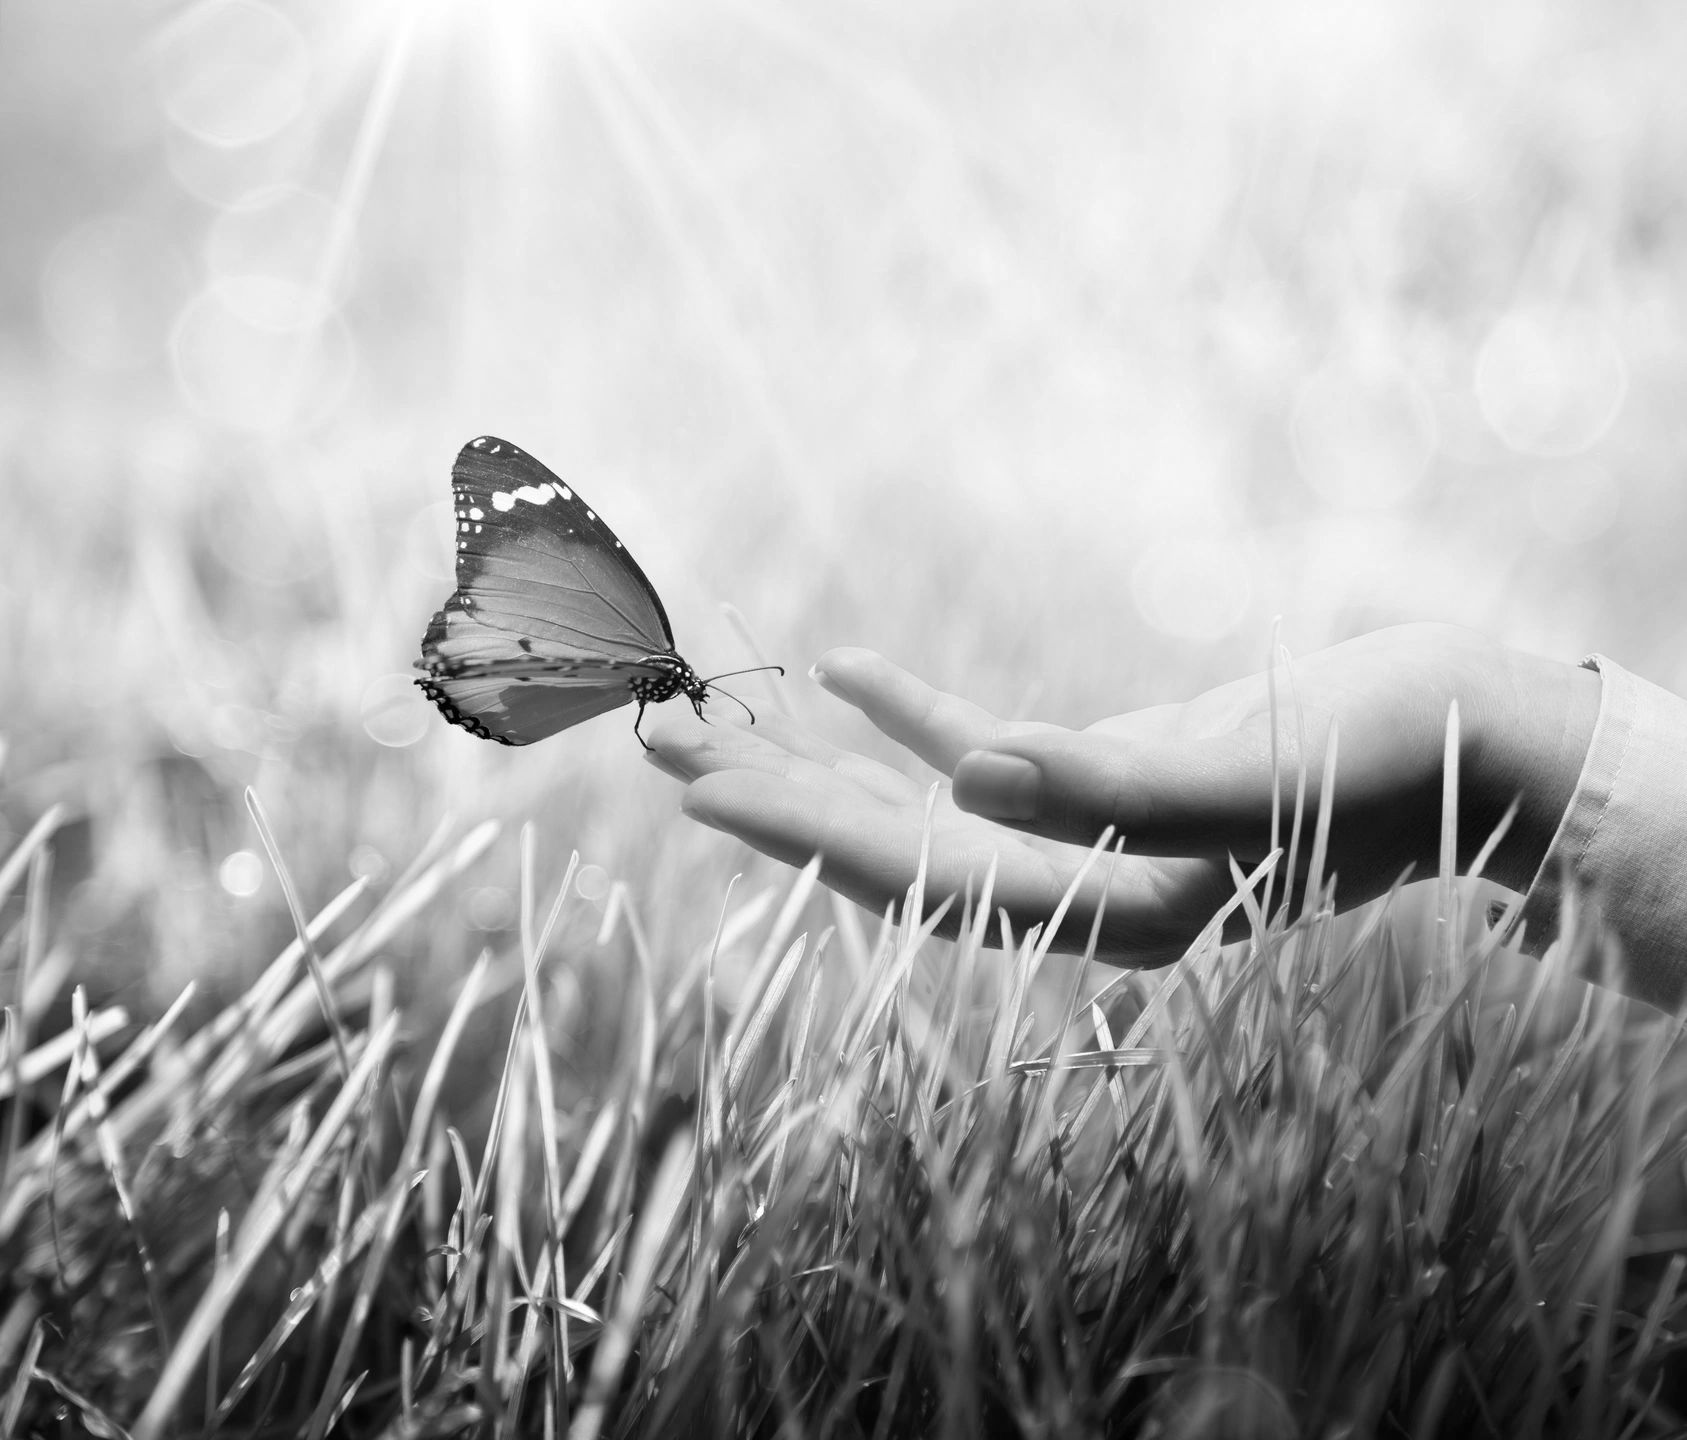 woman's hand with a butterfly resting on her fingers. Grass and sunlight.